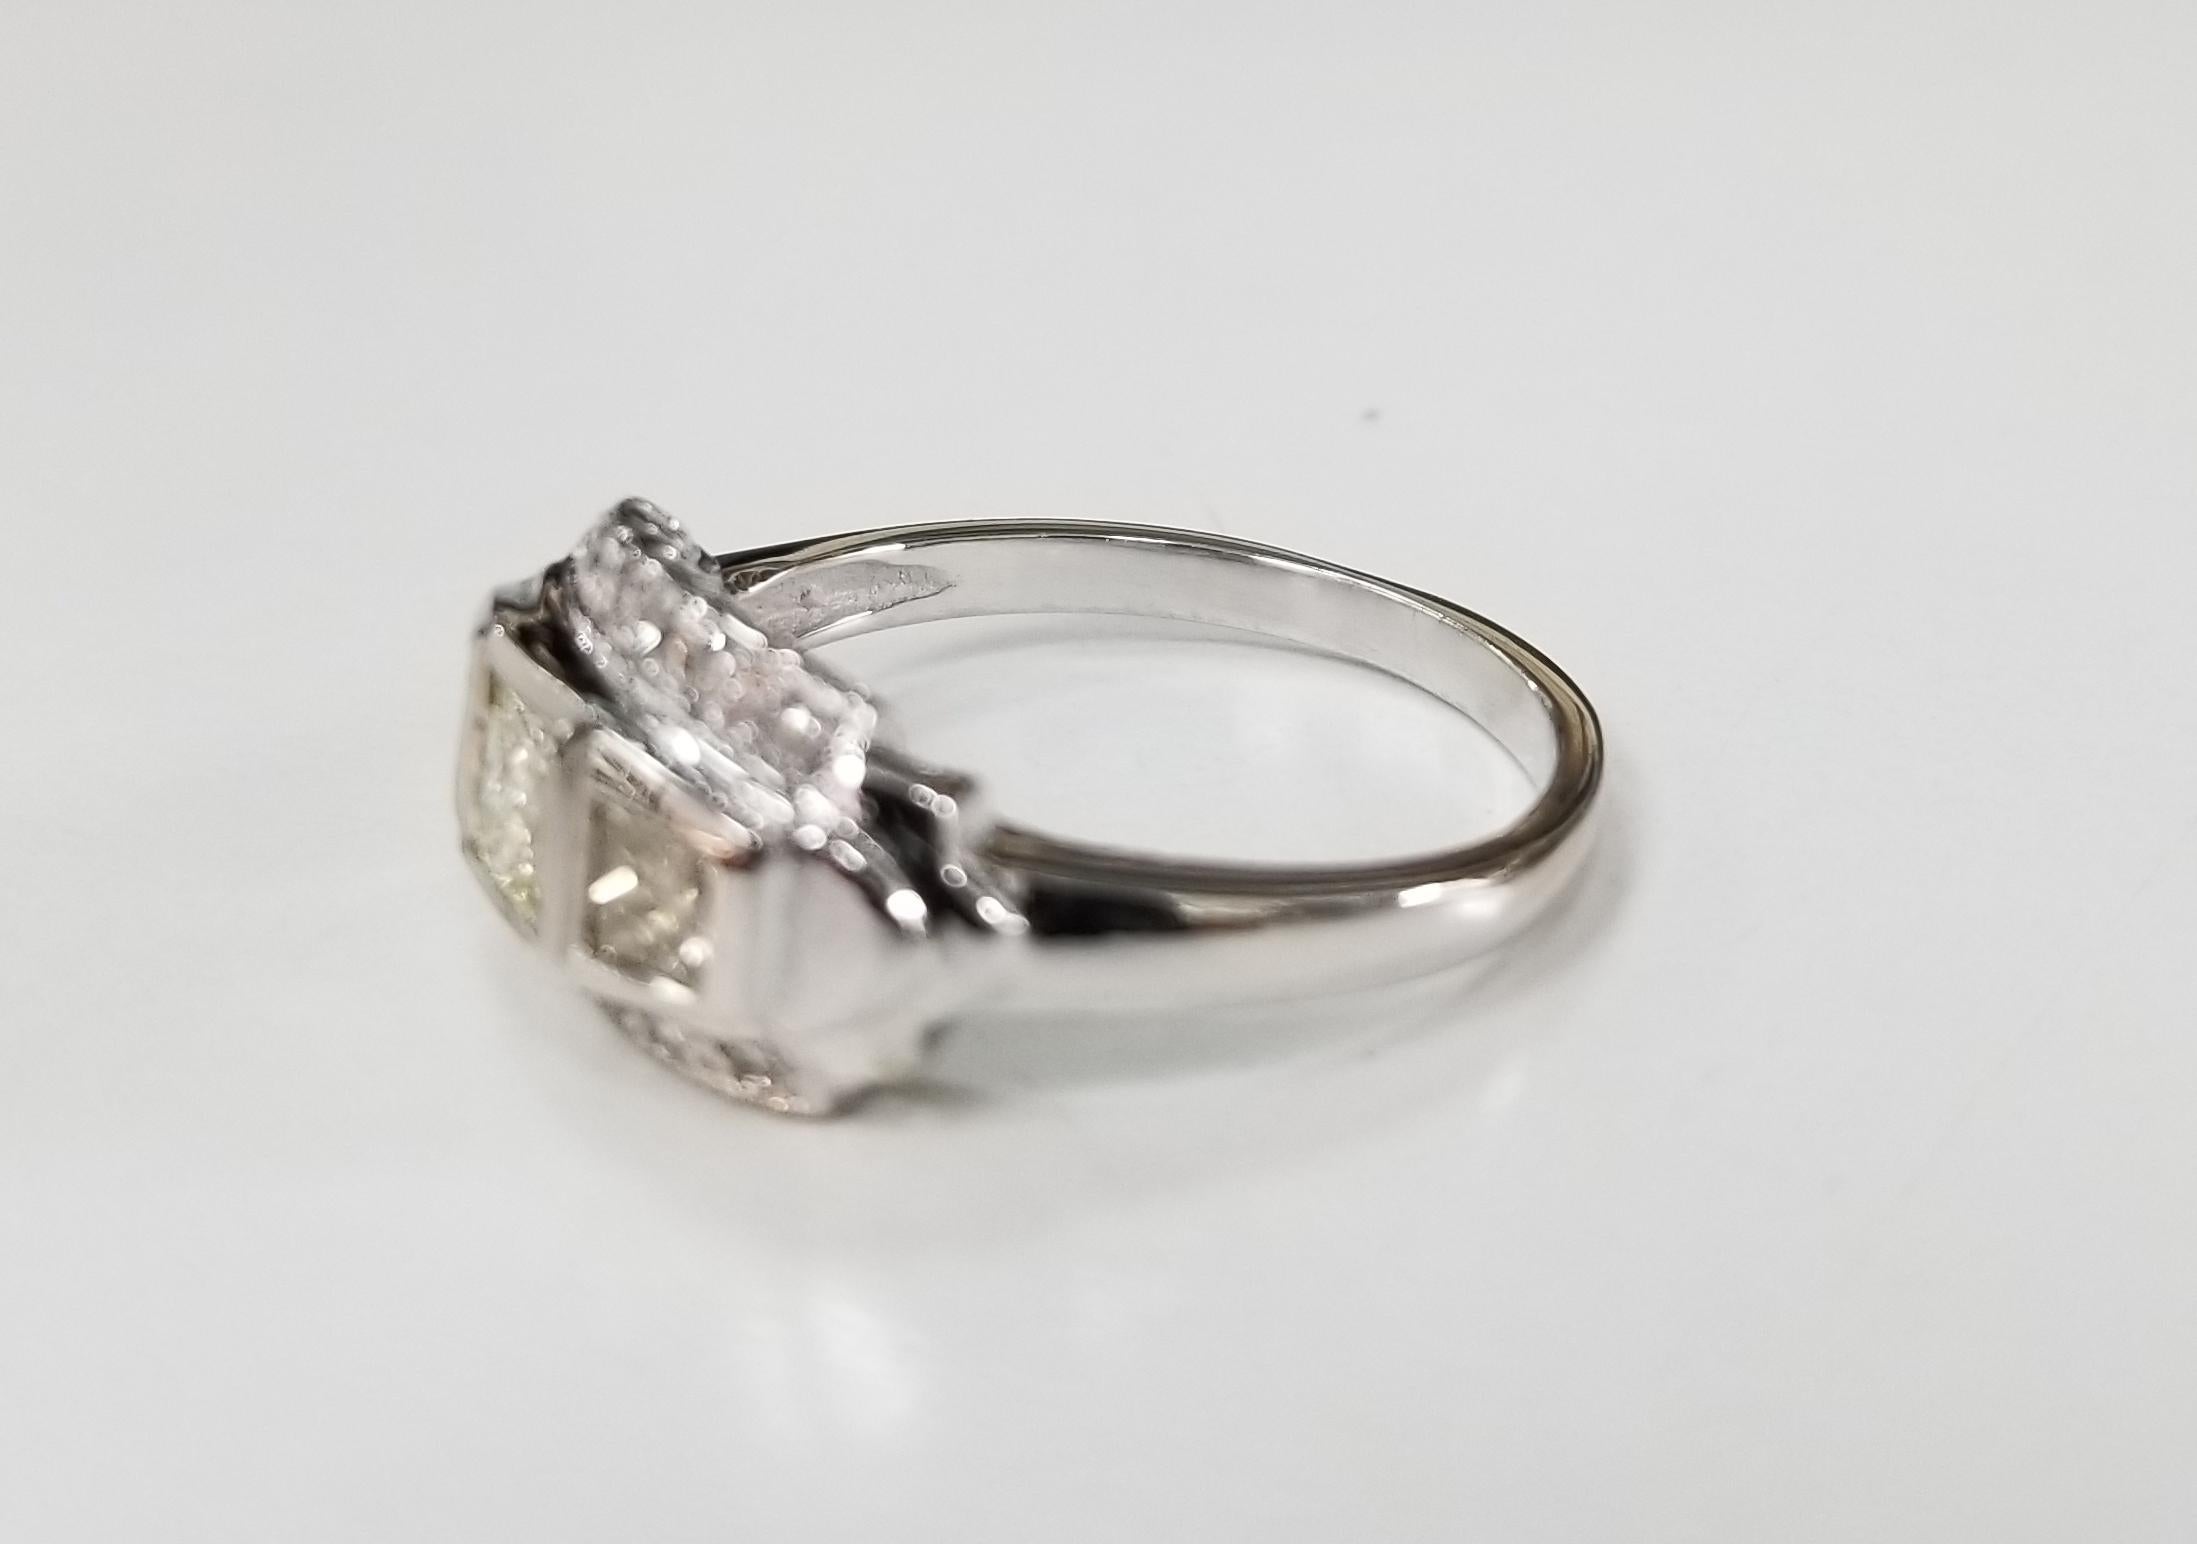 14 karat Art Deco Style diamond filigree ring, containing 3 princess cut diamonds of good quality weighing .56pts. and 12 round single cut diamonds weighing .15pts .ring is 6.25 and can be size to fit for free.